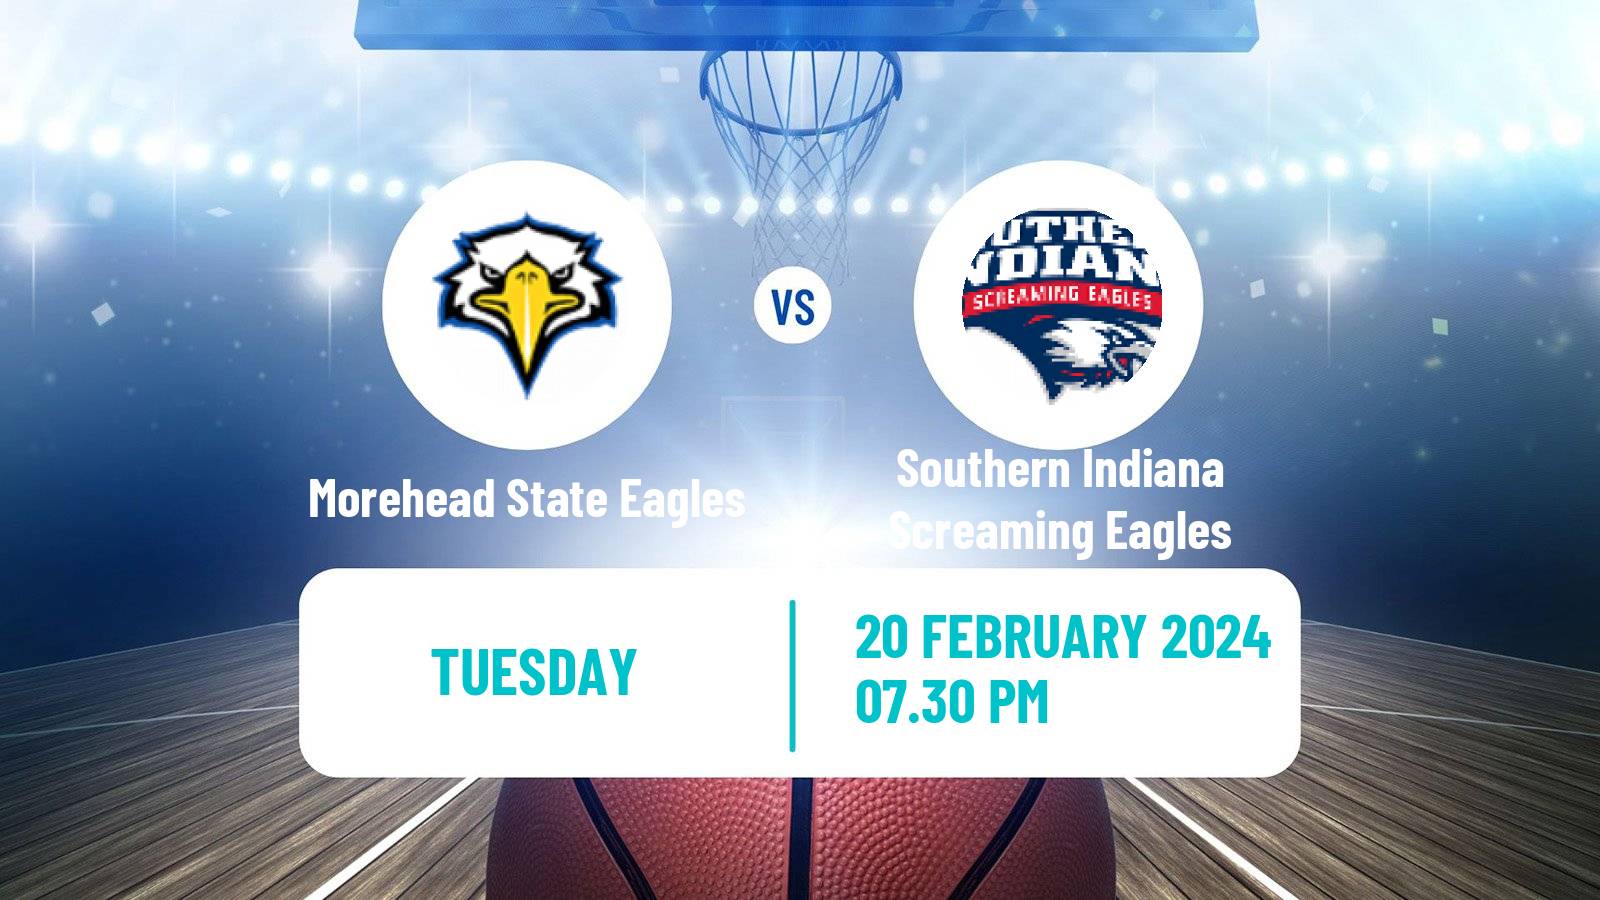 Basketball NCAA College Basketball Morehead State Eagles - Southern Indiana Screaming Eagles